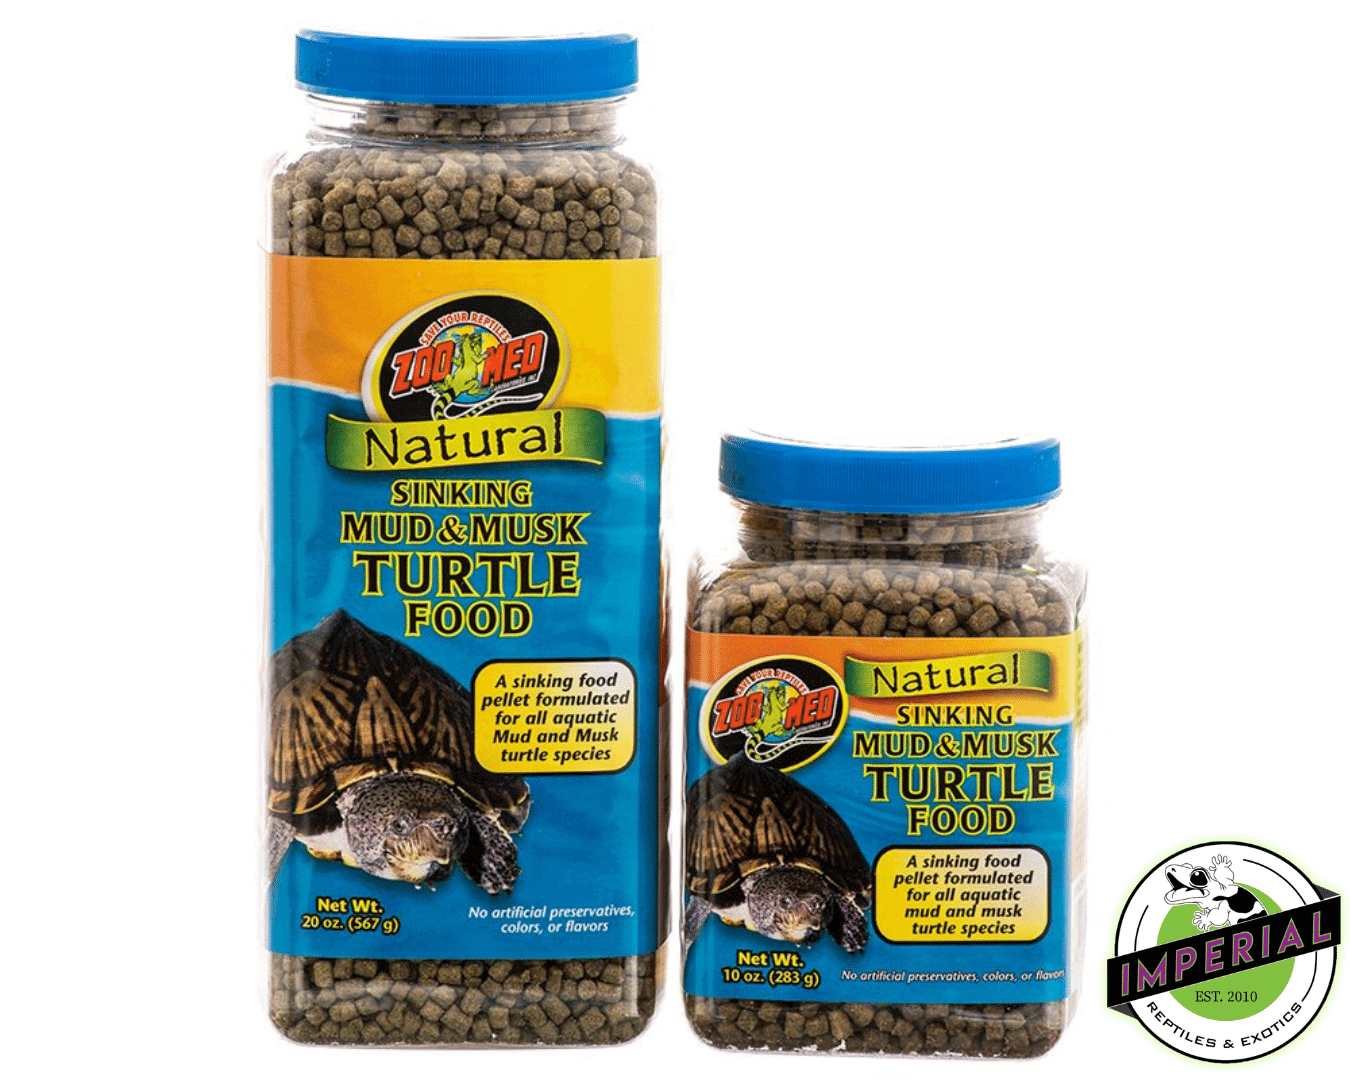 buy mud and musk turtle food for sale online, cheap reptile supplies near me